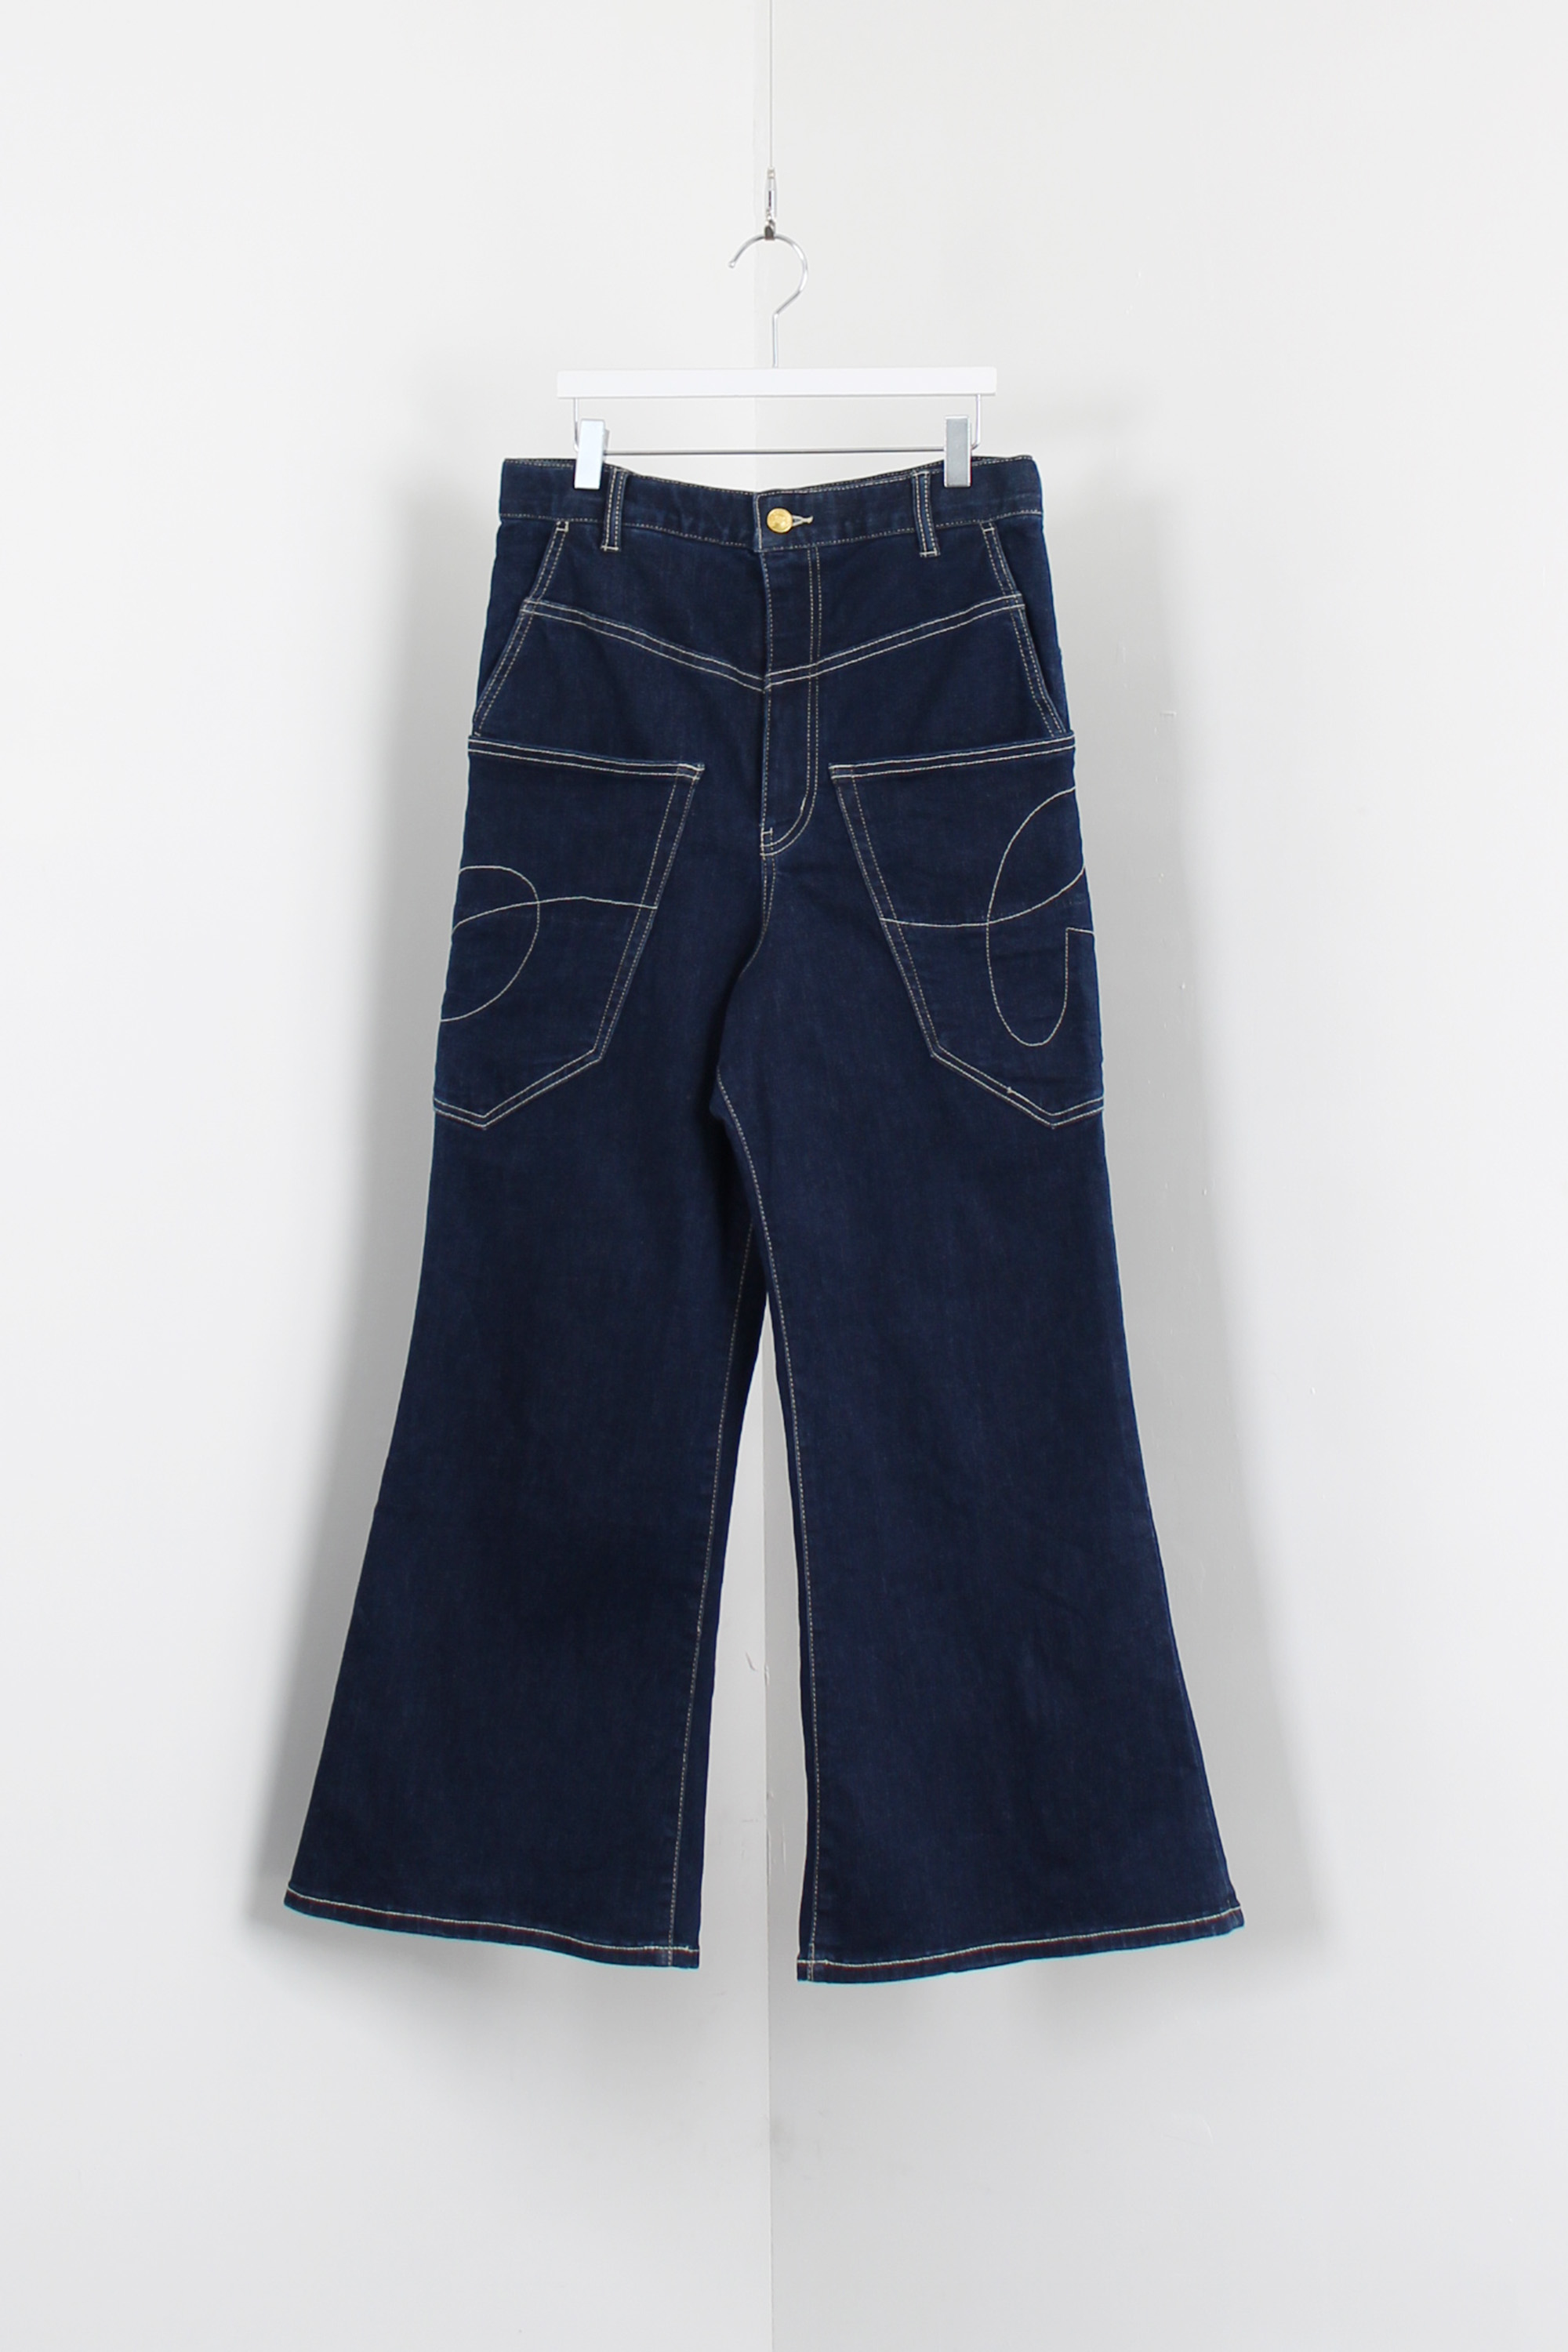 mercibeaucoup wide flare jean